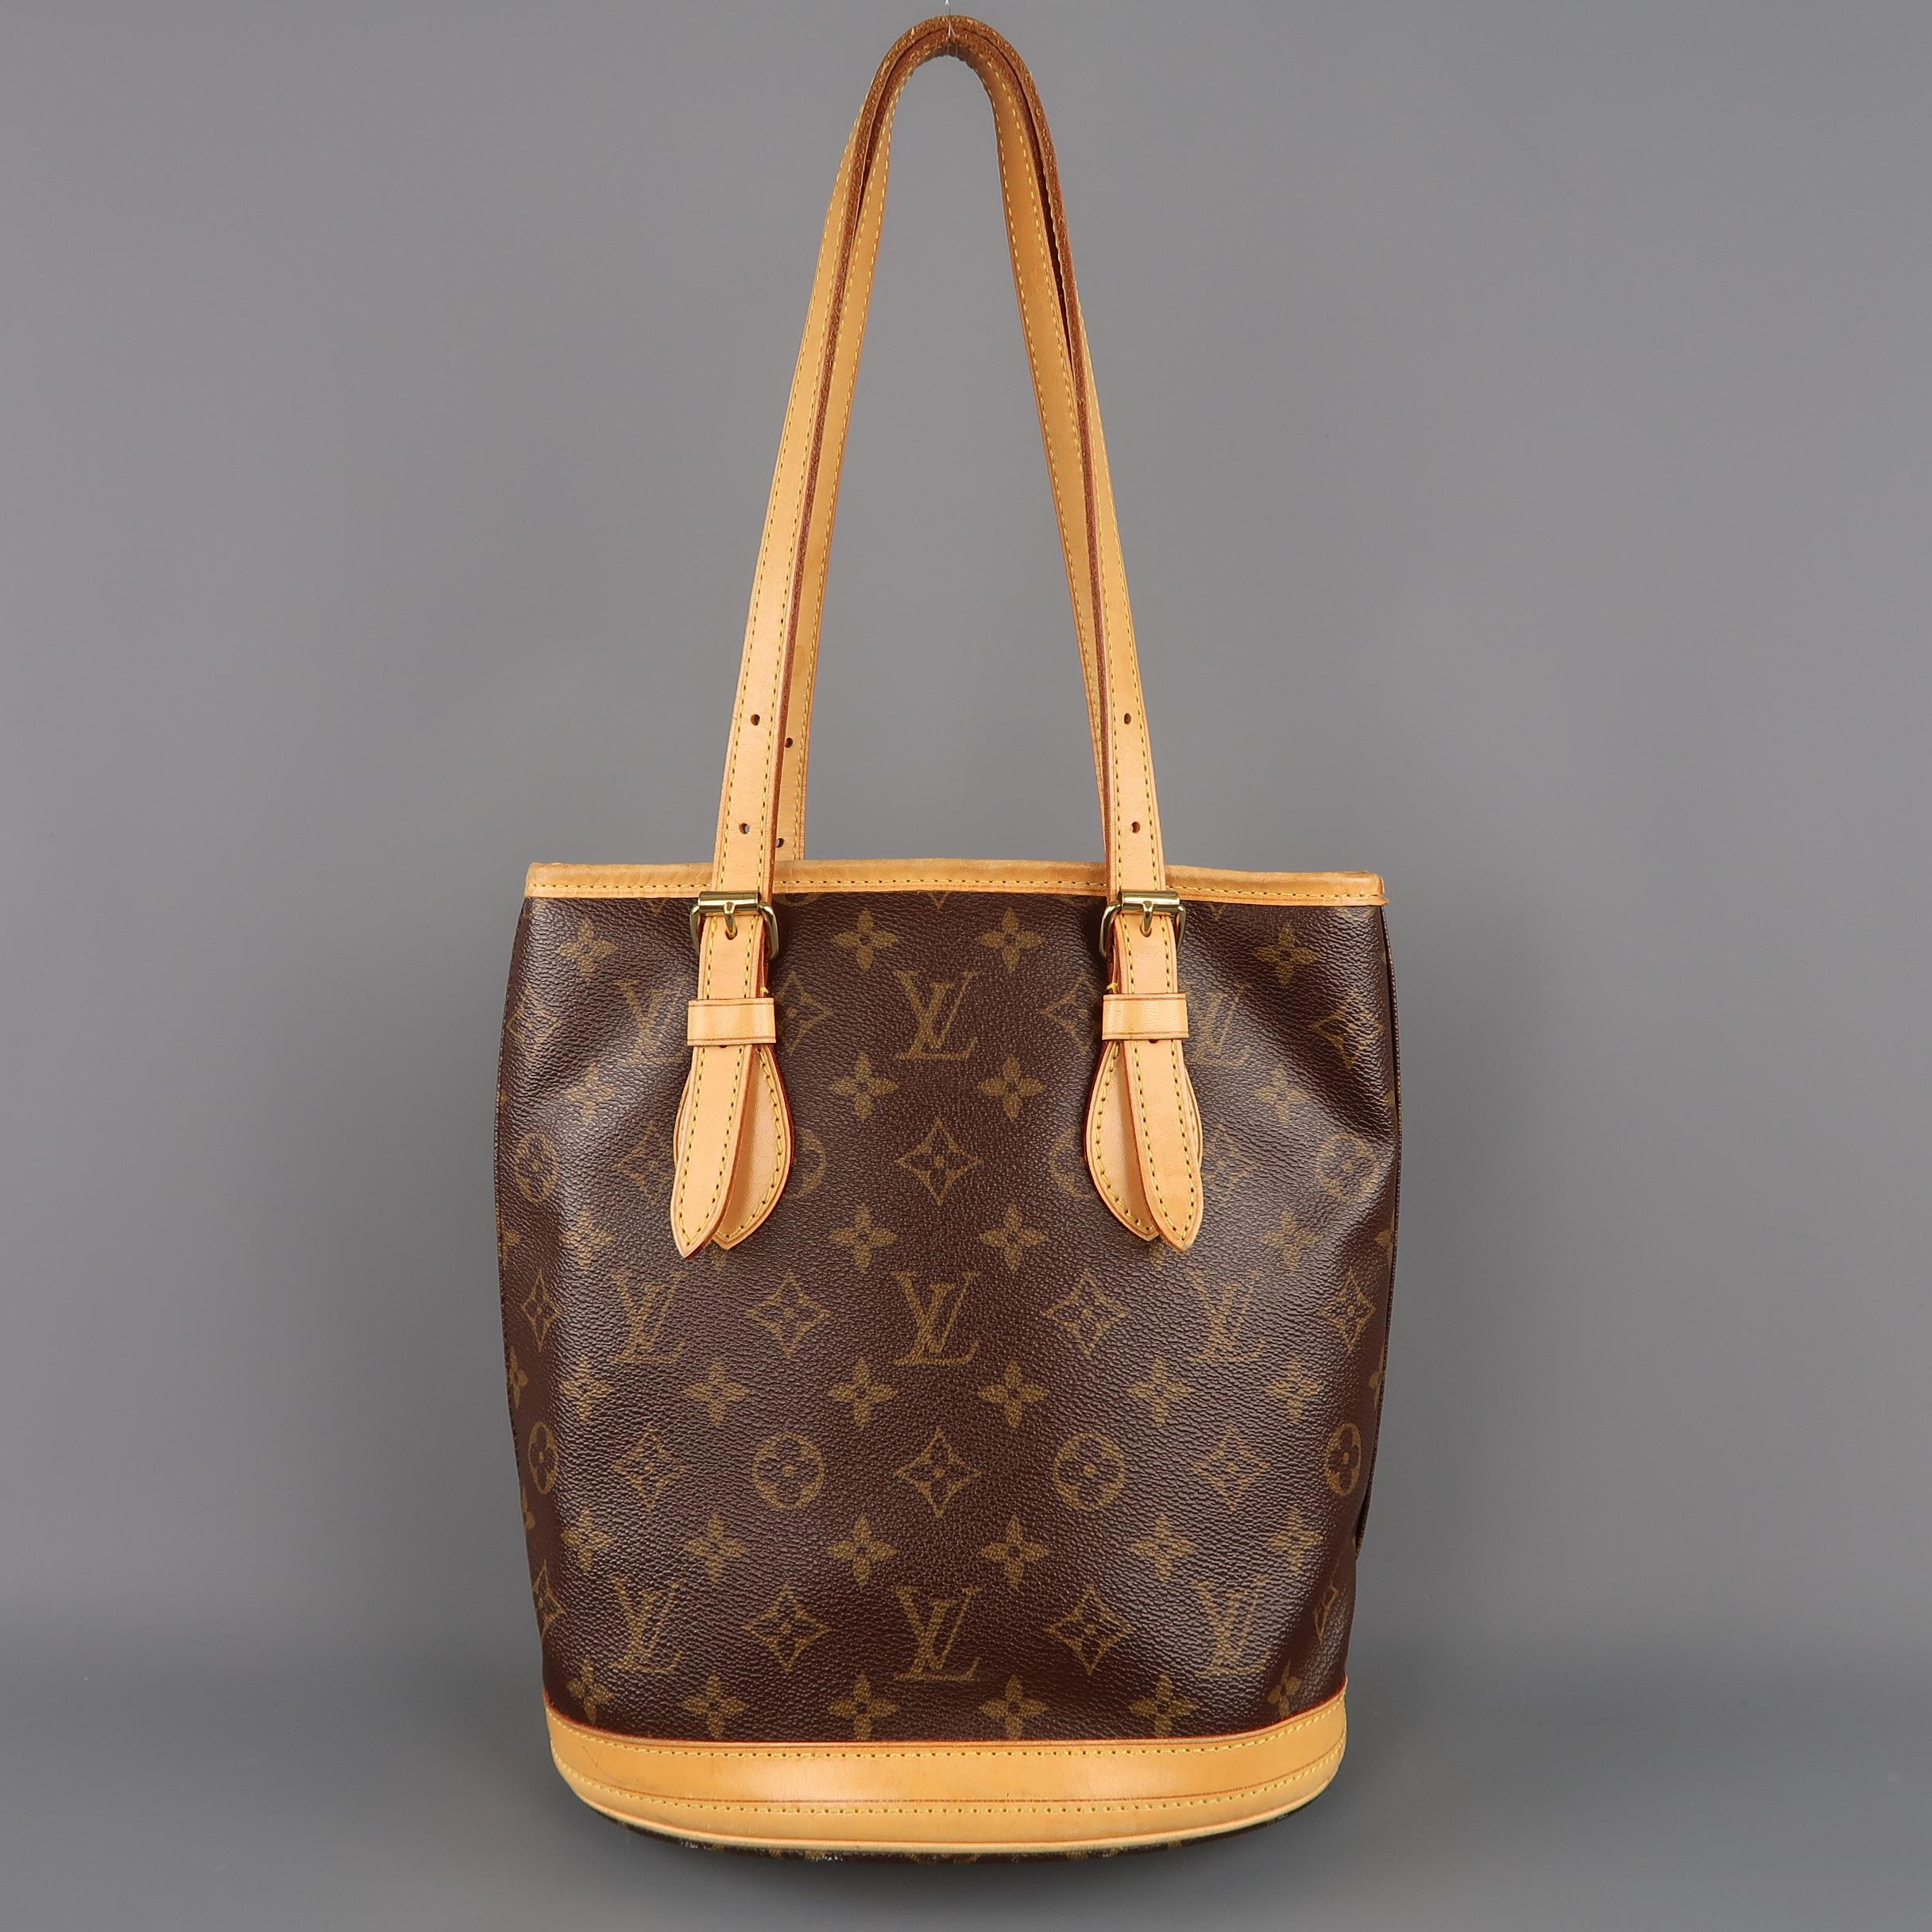 Vintage LOUIS VUITTON Bucket PM bag comes in classic brown monogram coated canvas with Vachetta leather trim and double top handles. Wear throughout and petina on leather. As-is. Made in USA.
 
Fair Pre-Owned Condition.
 
Measurements:
 
Length: